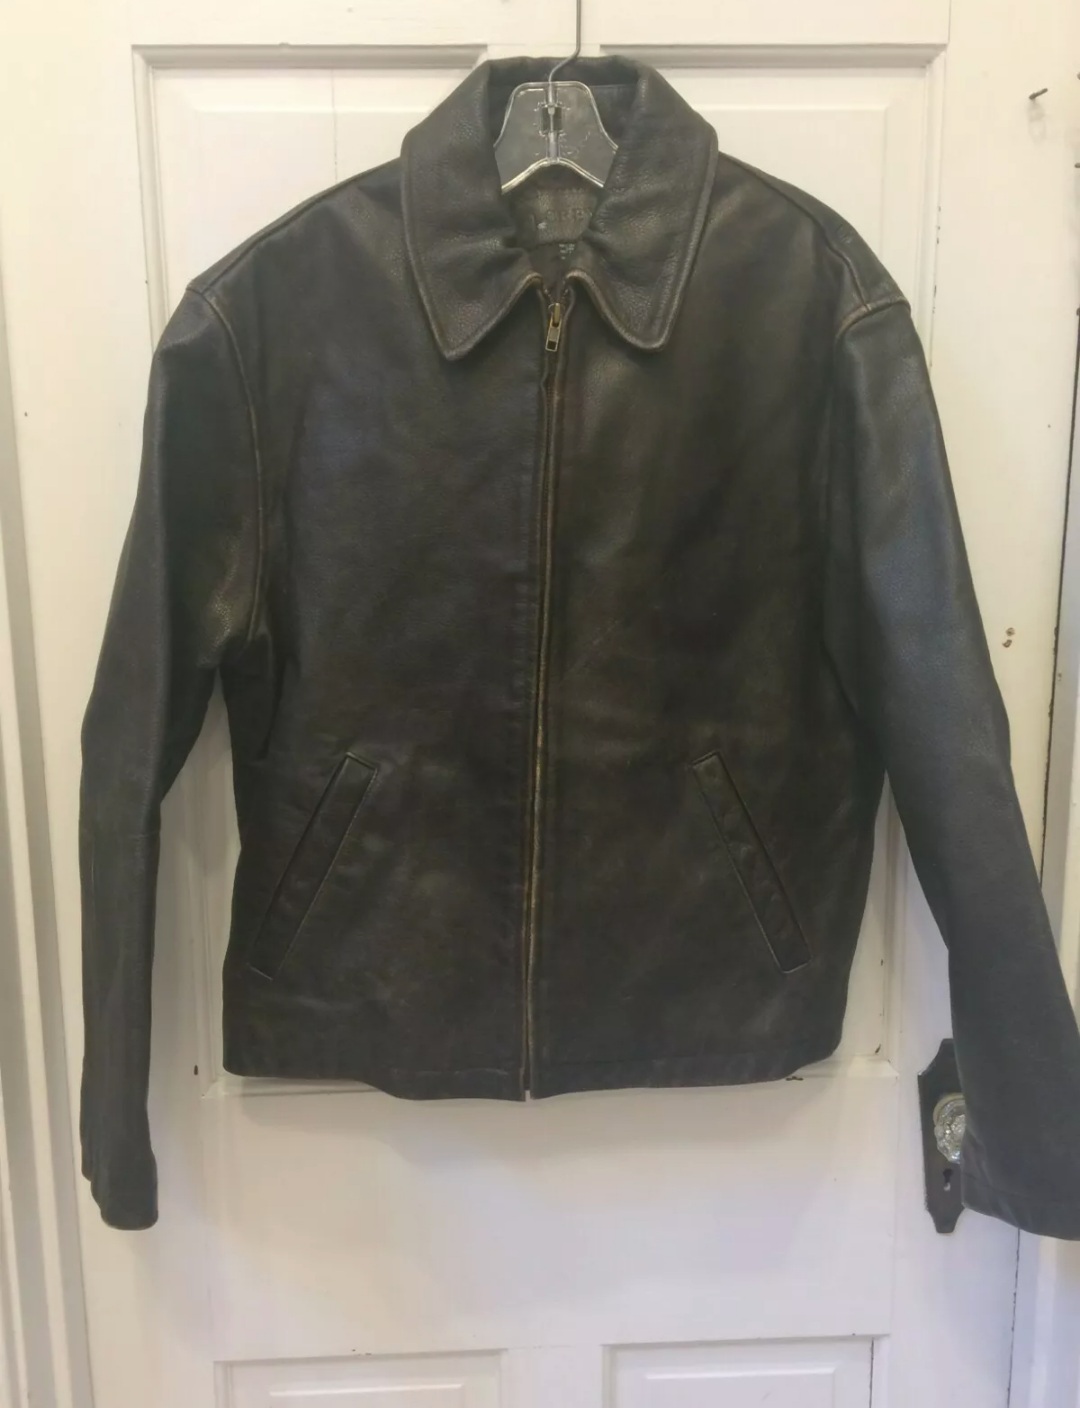 Budget Skyfall Leather Jacket Help | RPF Costume and Prop Maker Community